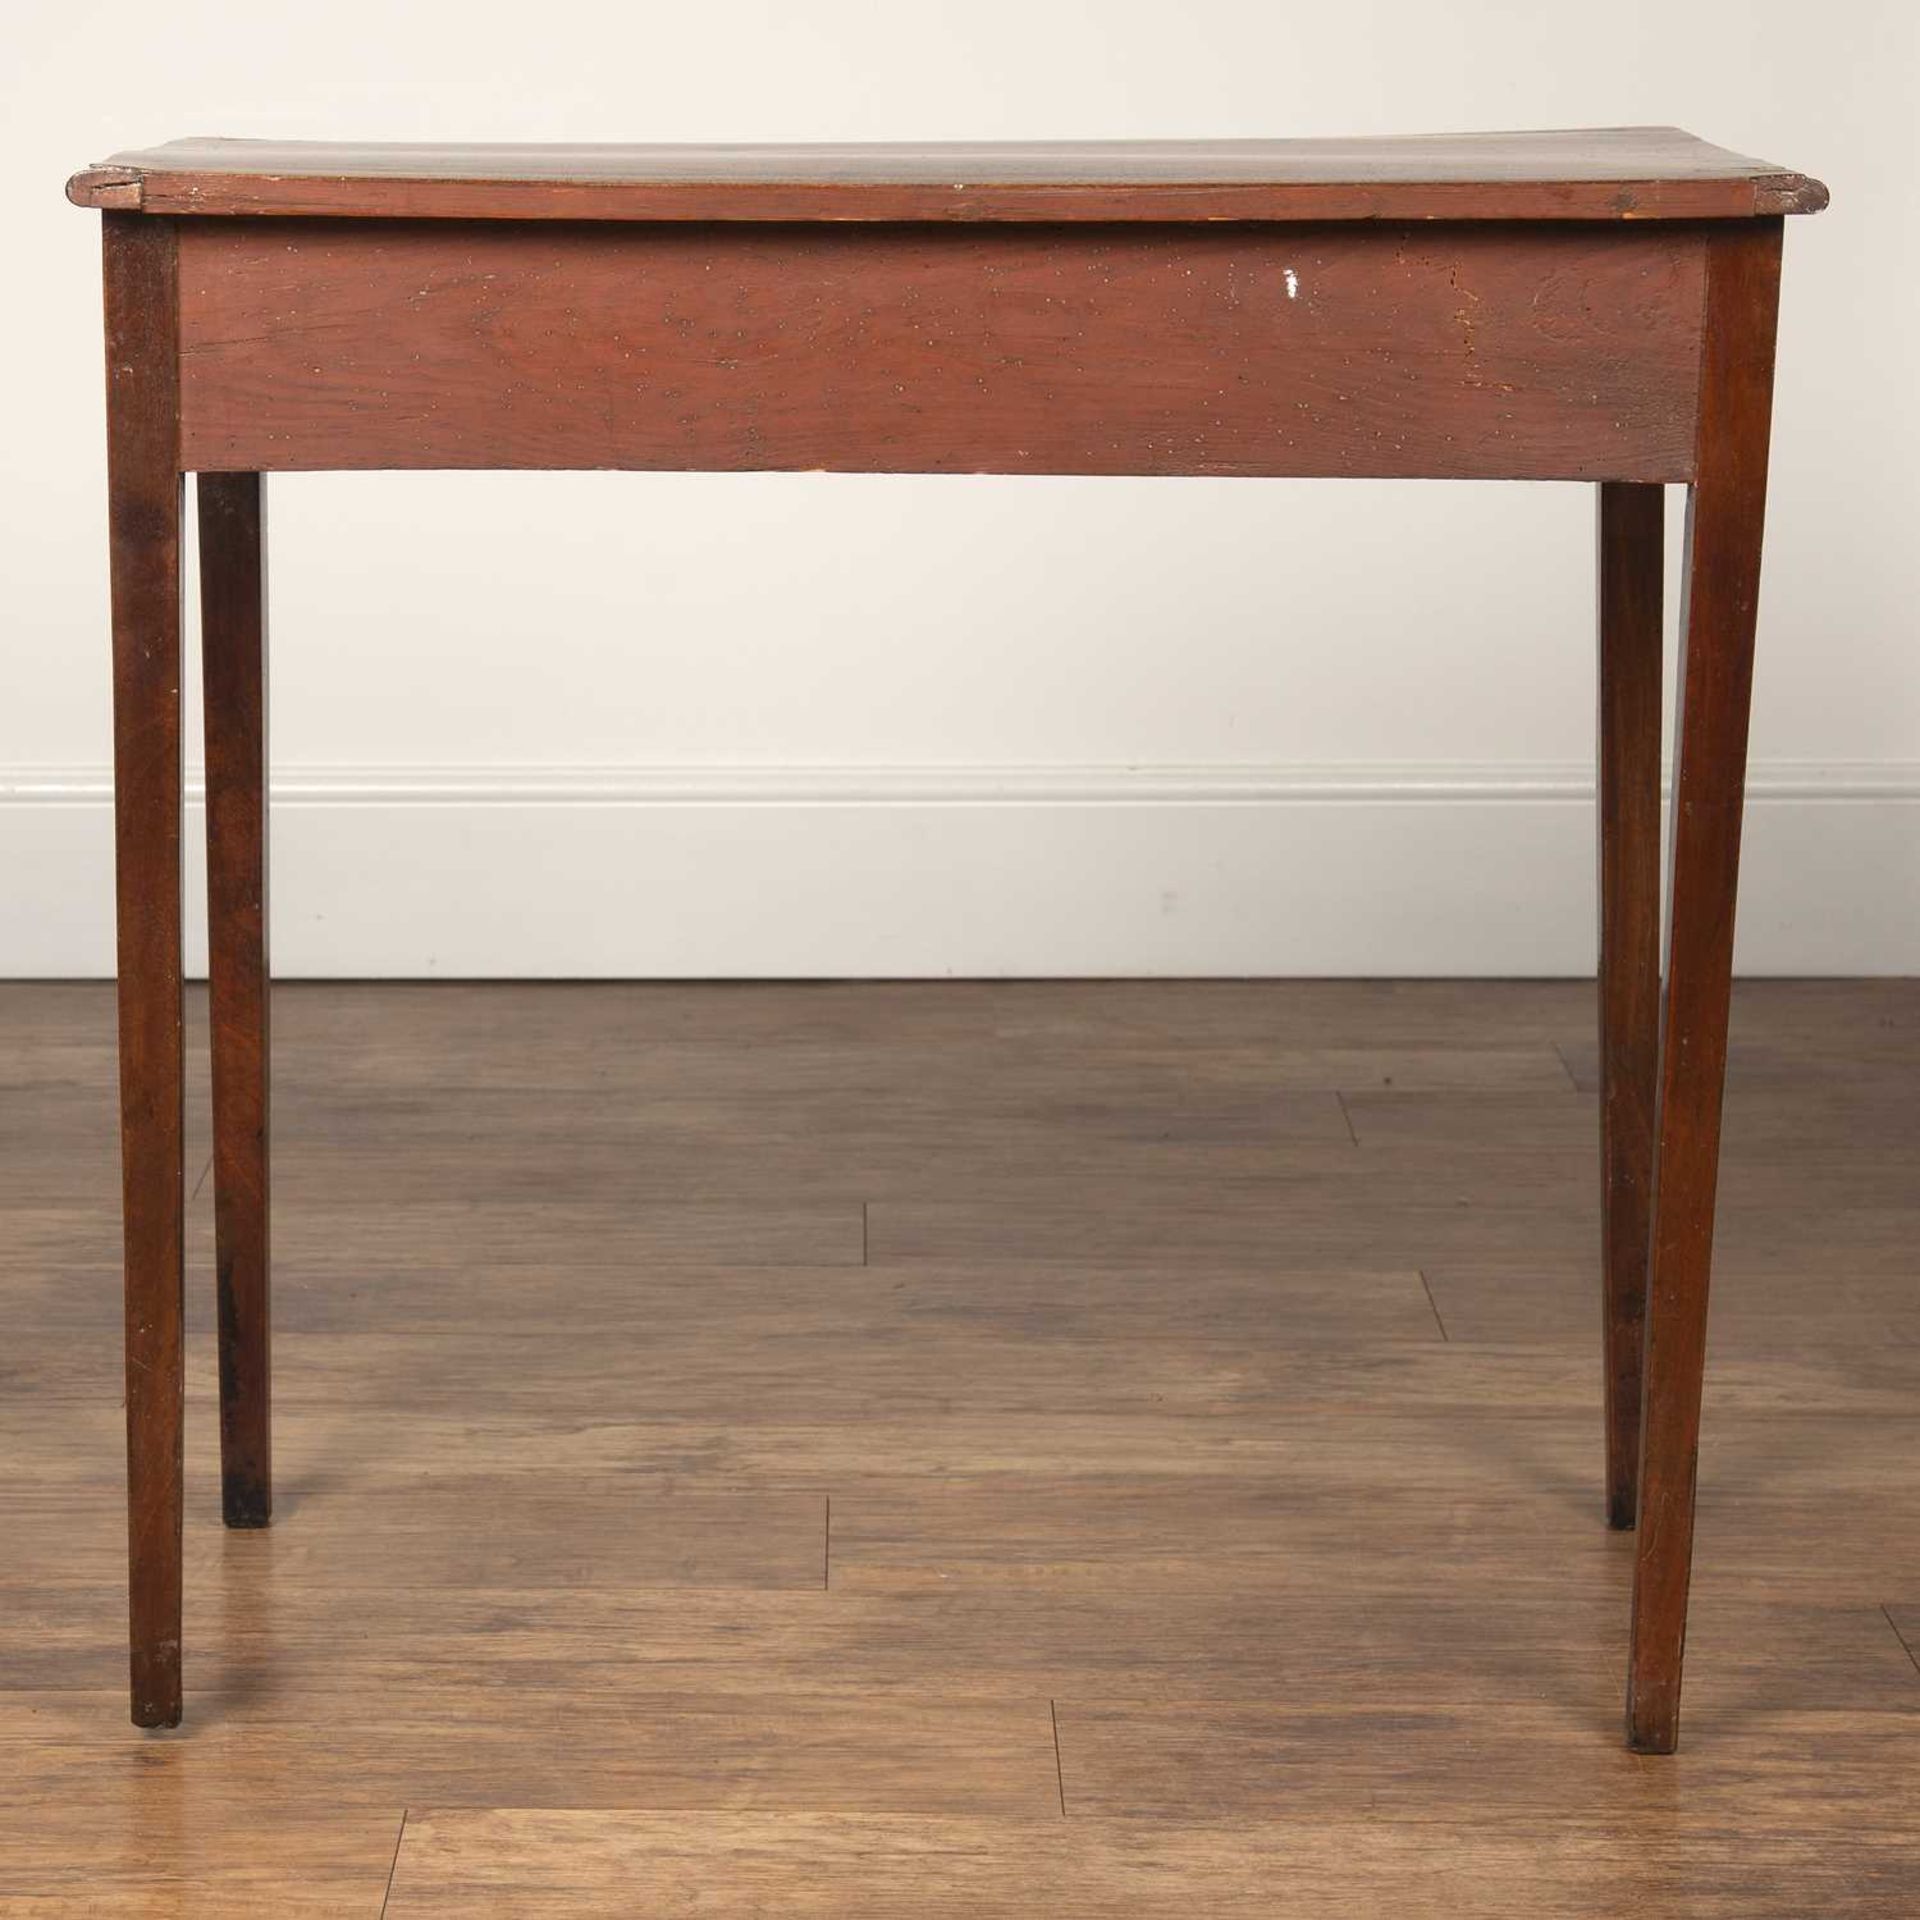 Mahogany side table 19th Century, with single long frieze drawer, with round brass handles, 80cm - Image 4 of 6